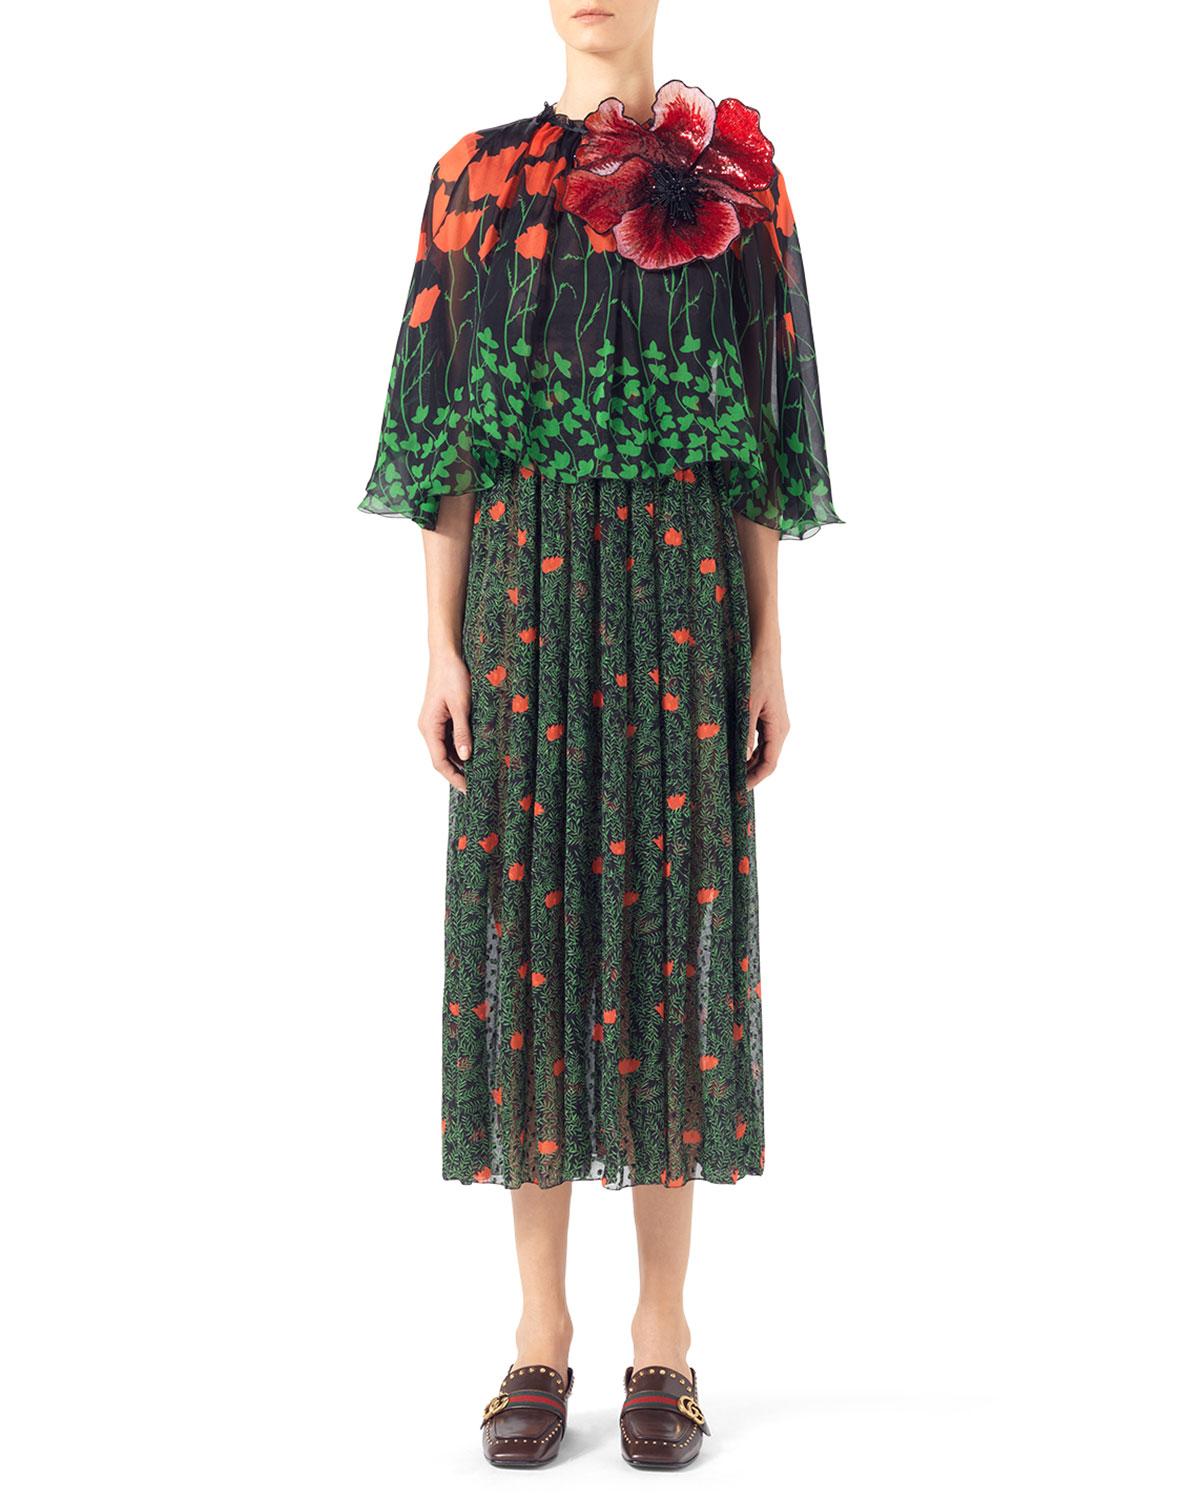 GUCCI Printed Fil Coupe Cape Dress IT42 US 4-6 In New Condition For Sale In Brossard, QC